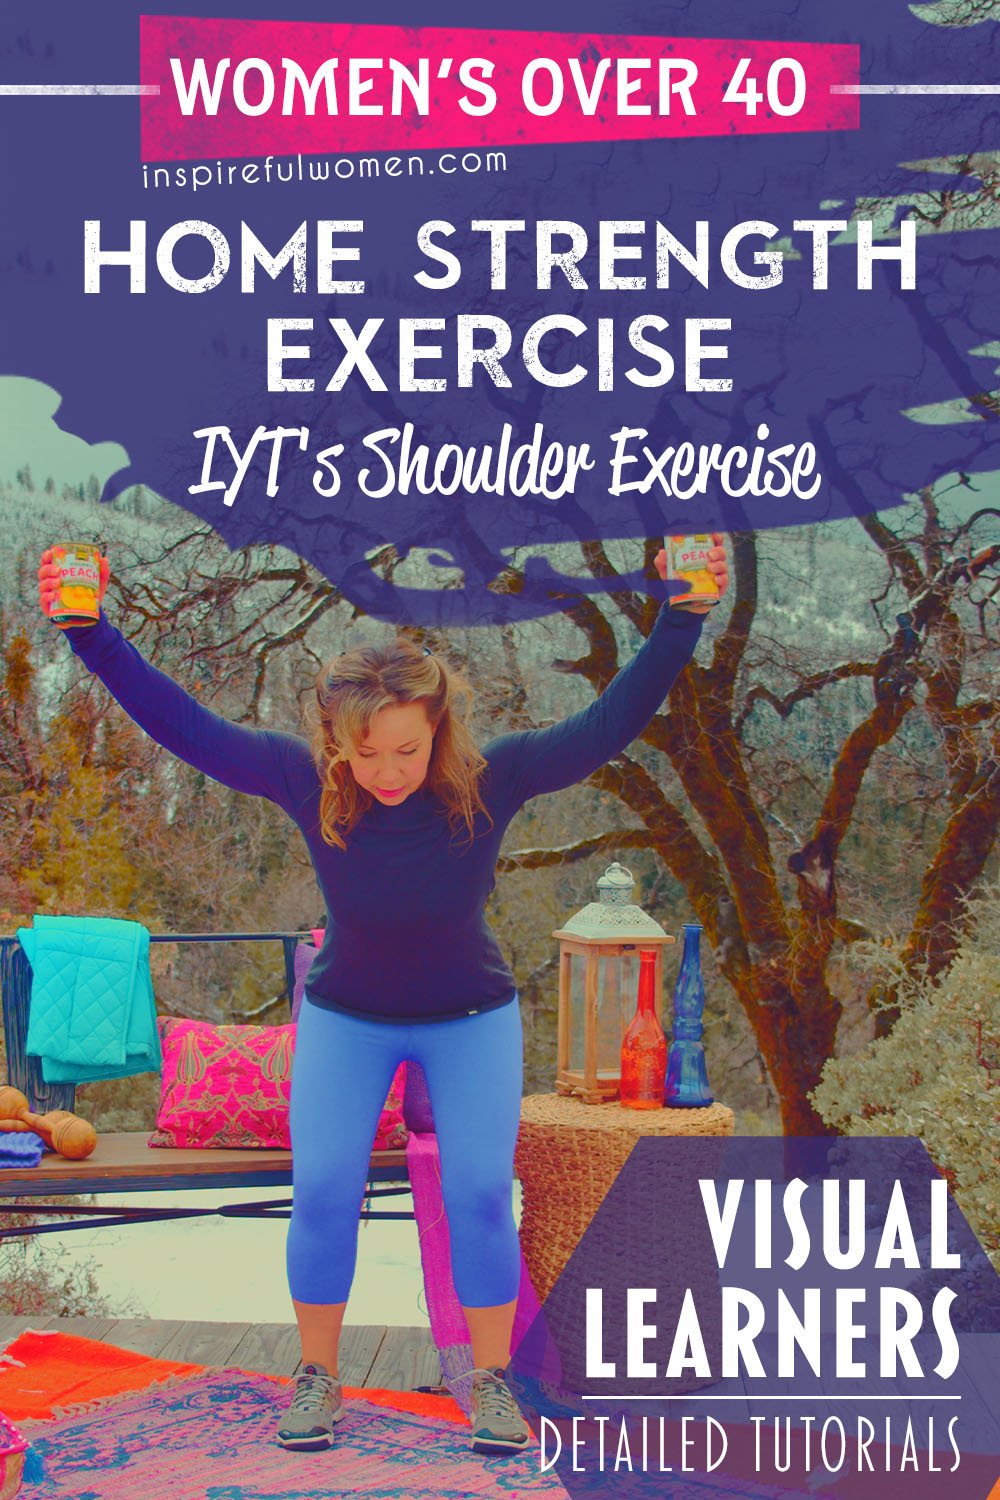 iyts-tyis-standing-bent-over-shoulder-activation-rotator-cuff-exercise-proper-form-women-over-40